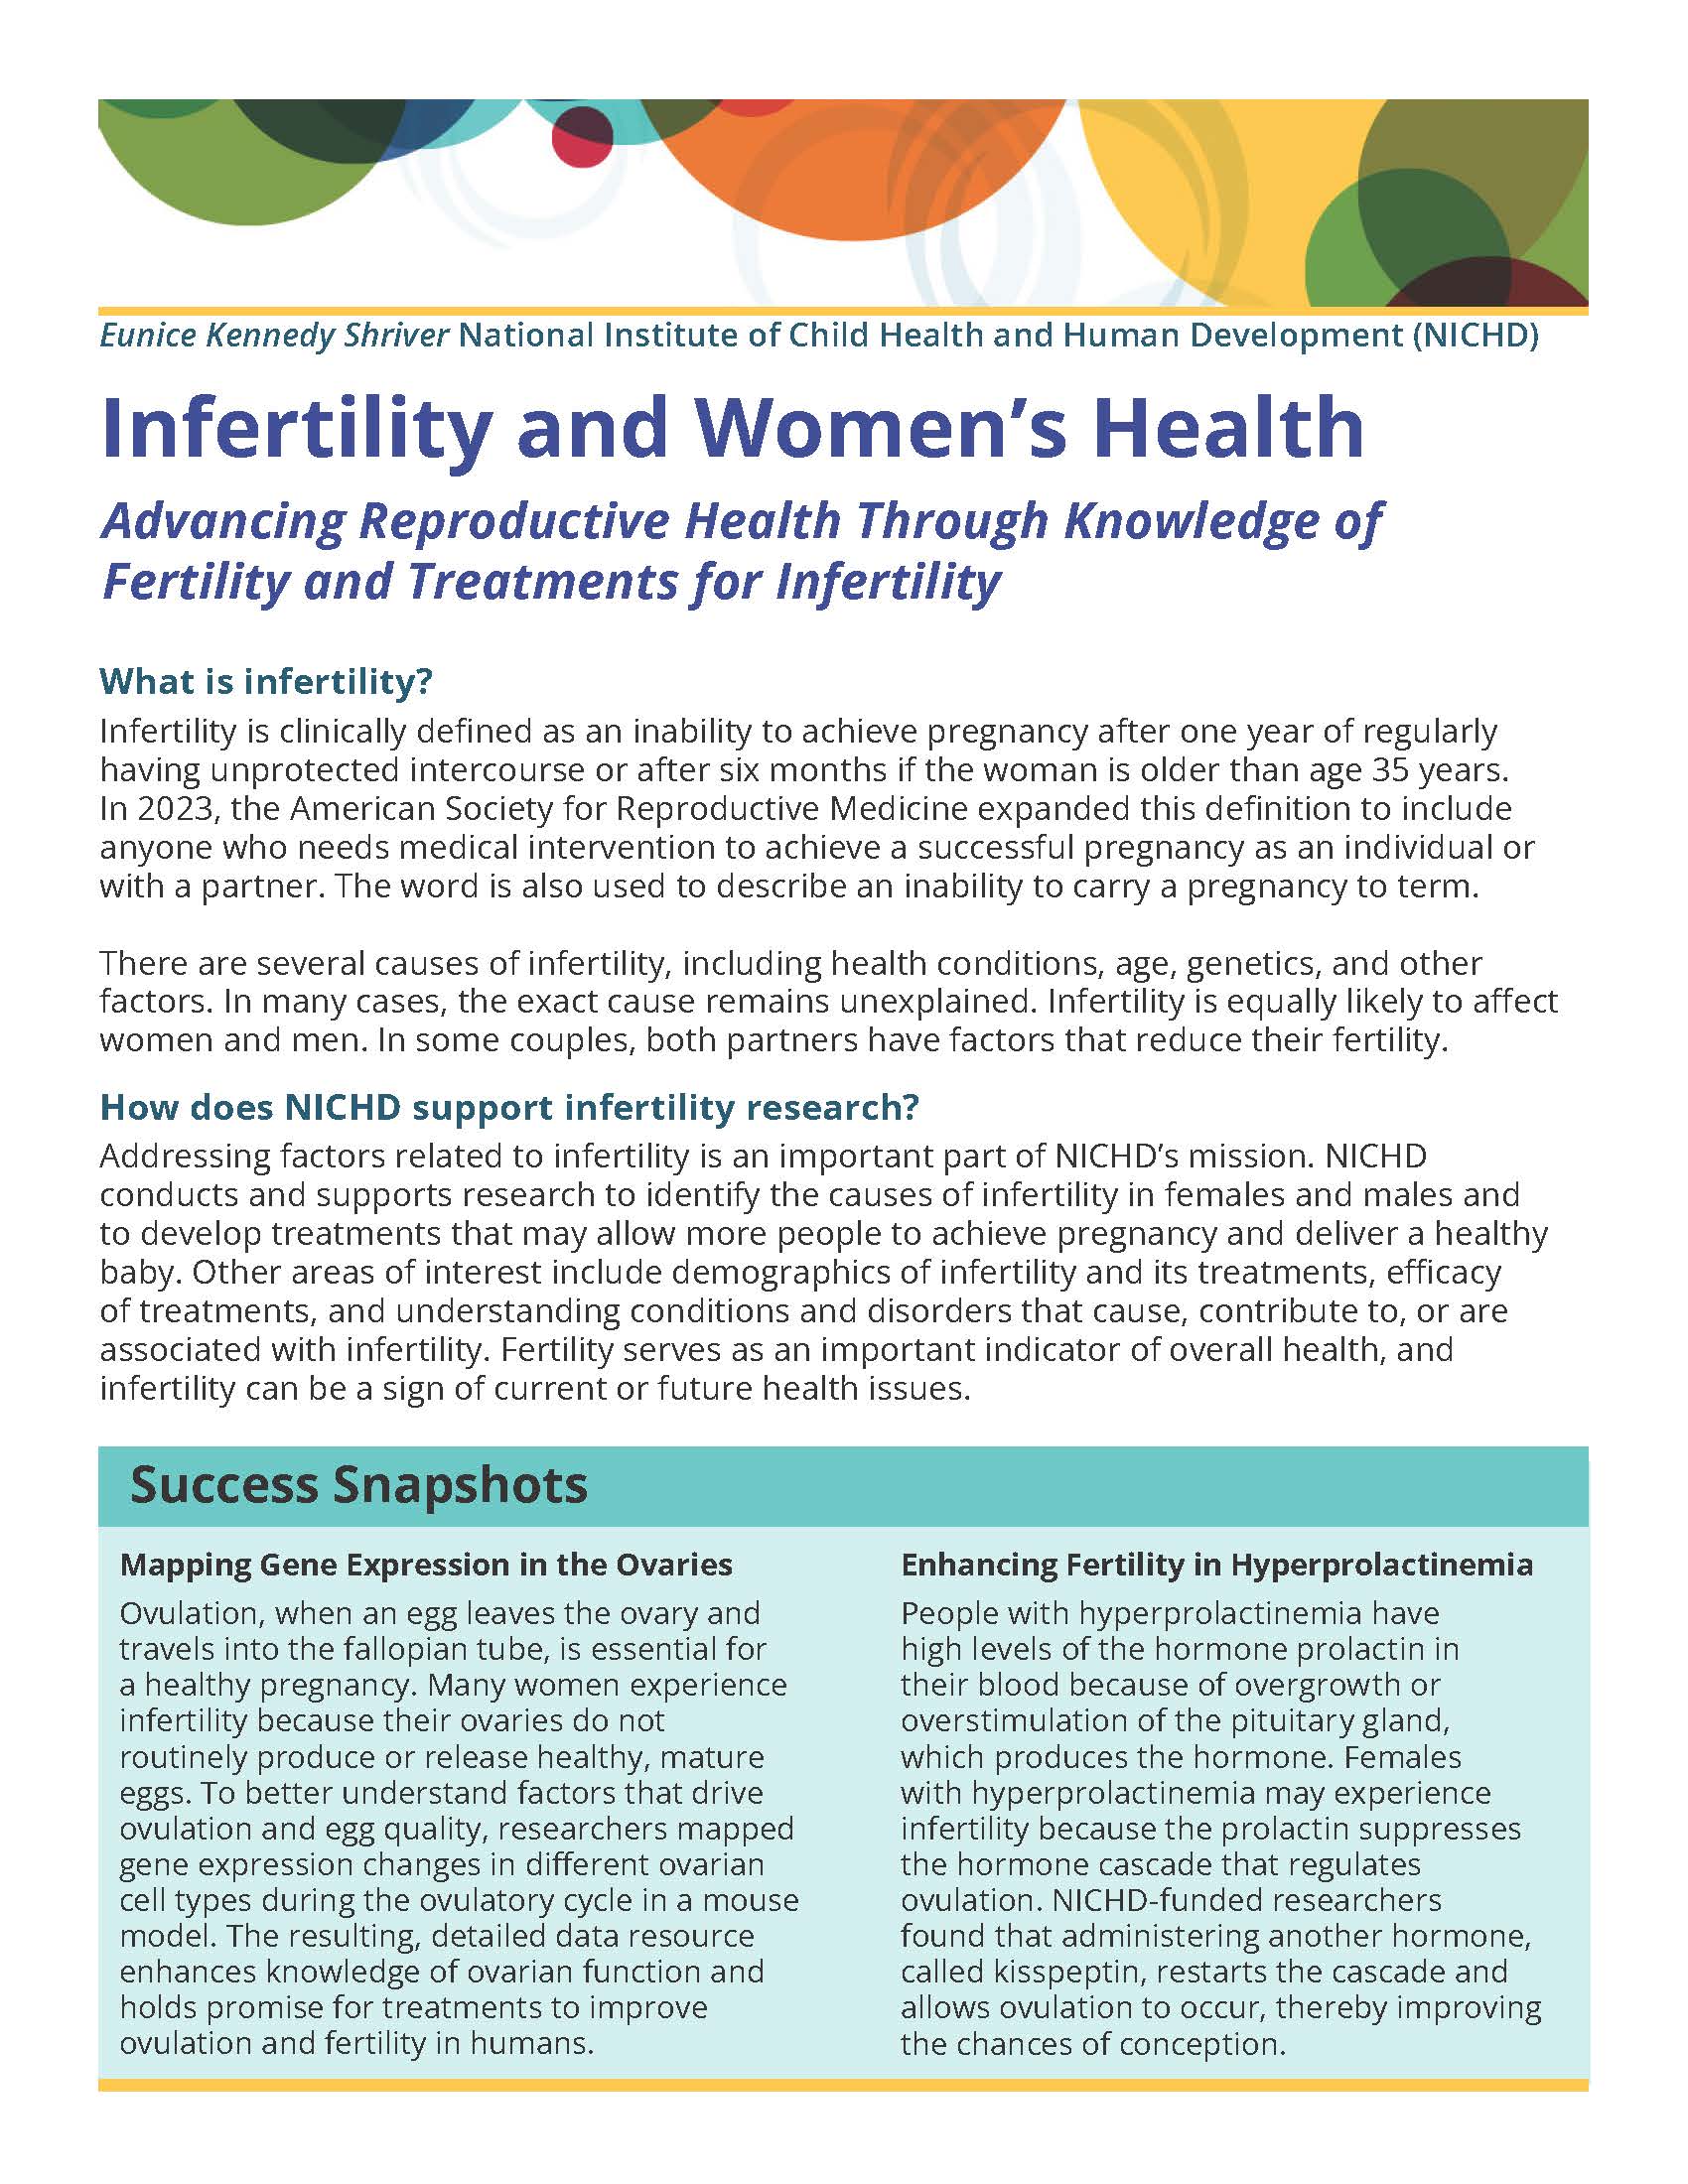 Front of the NICHD "Infertility and Women's Health" Fact Sheet